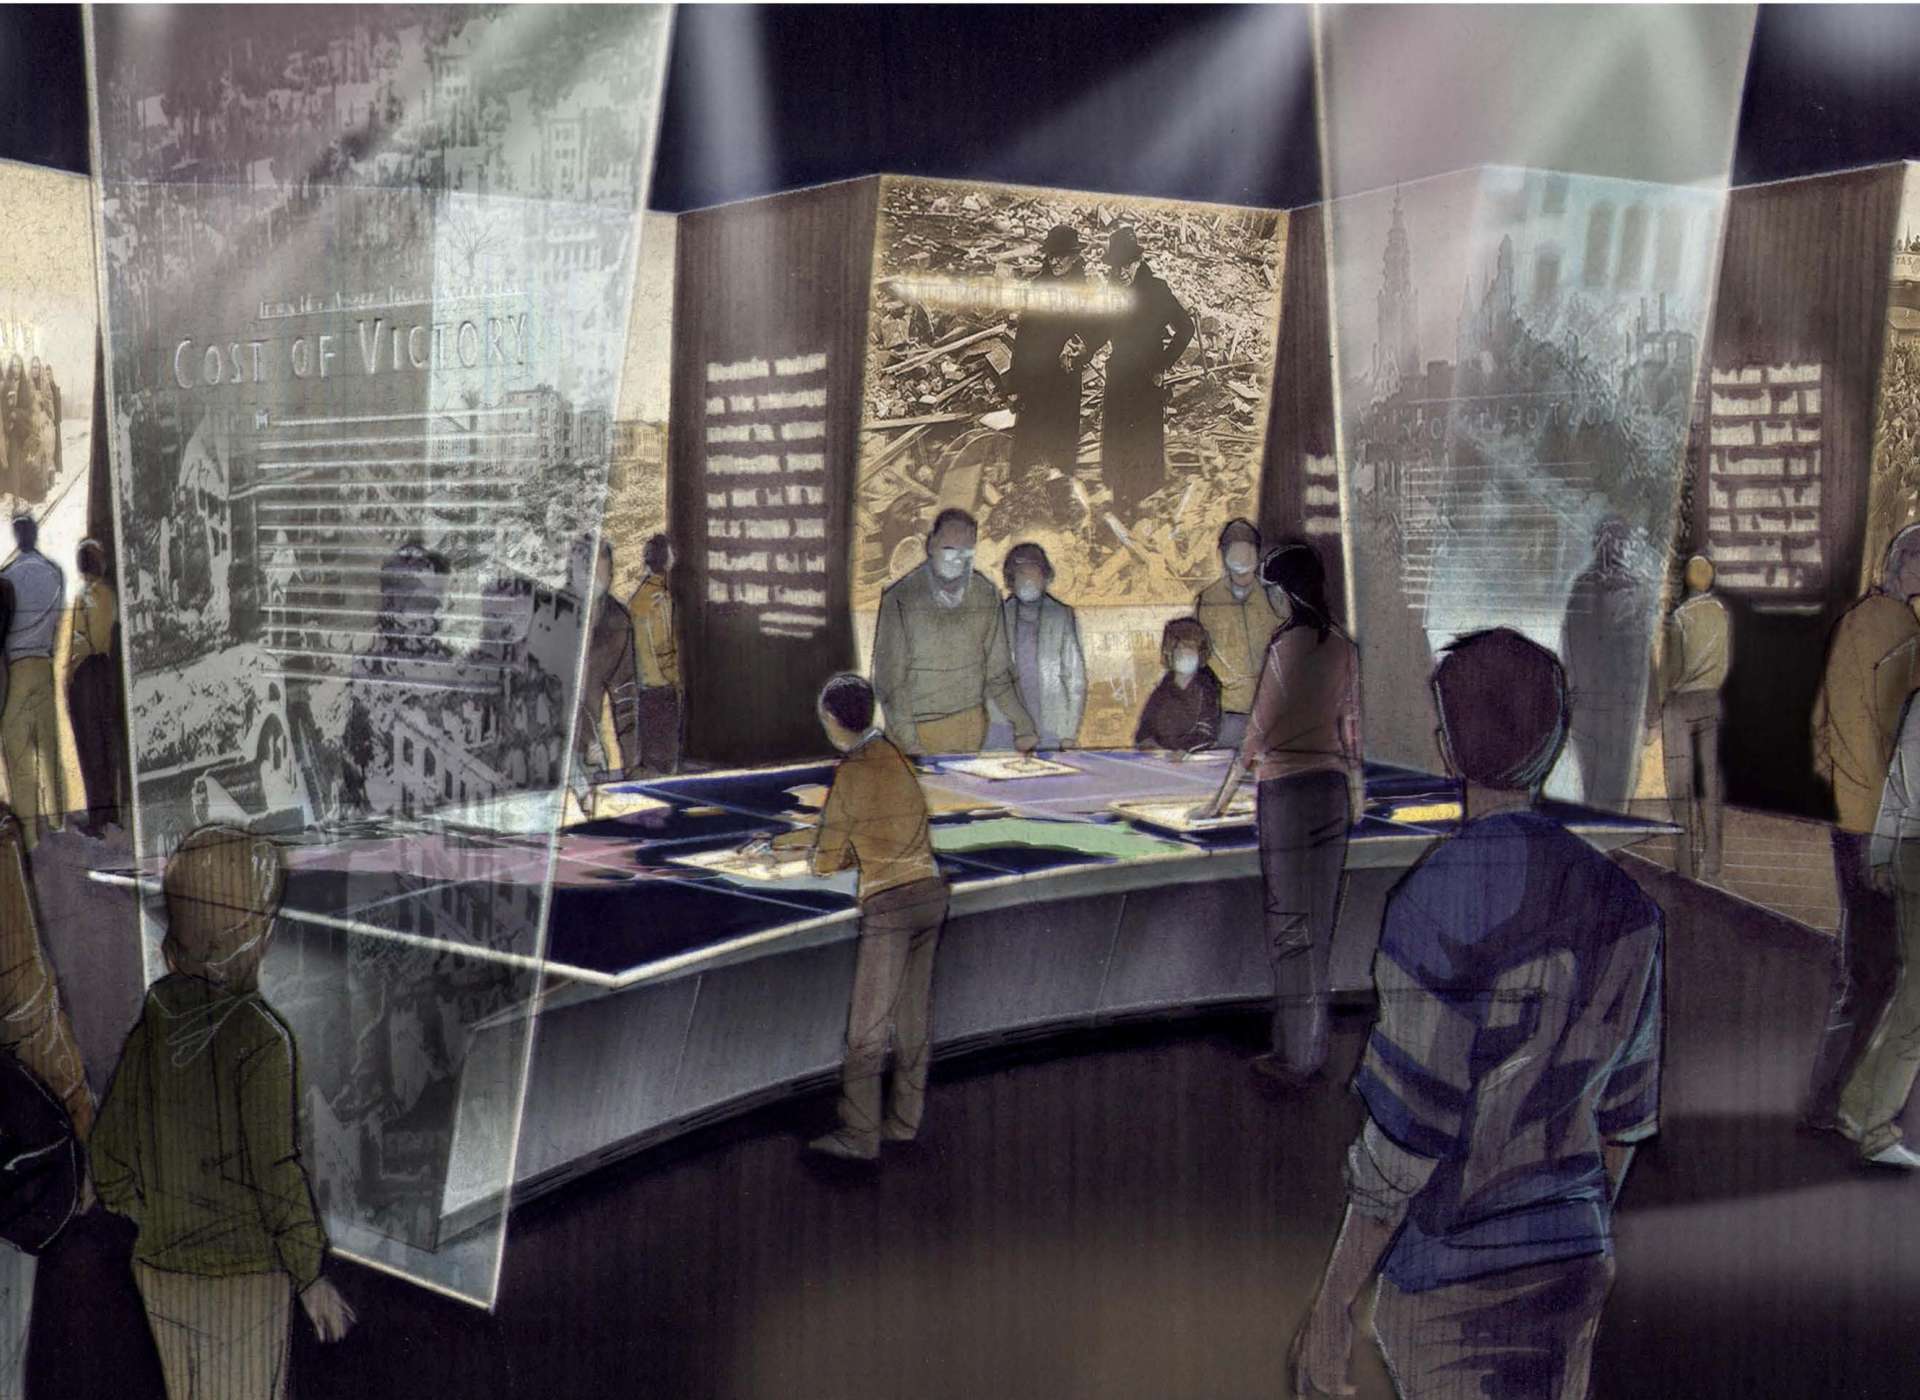 Liberation Pavilion Cost of Victory exhibit rendering